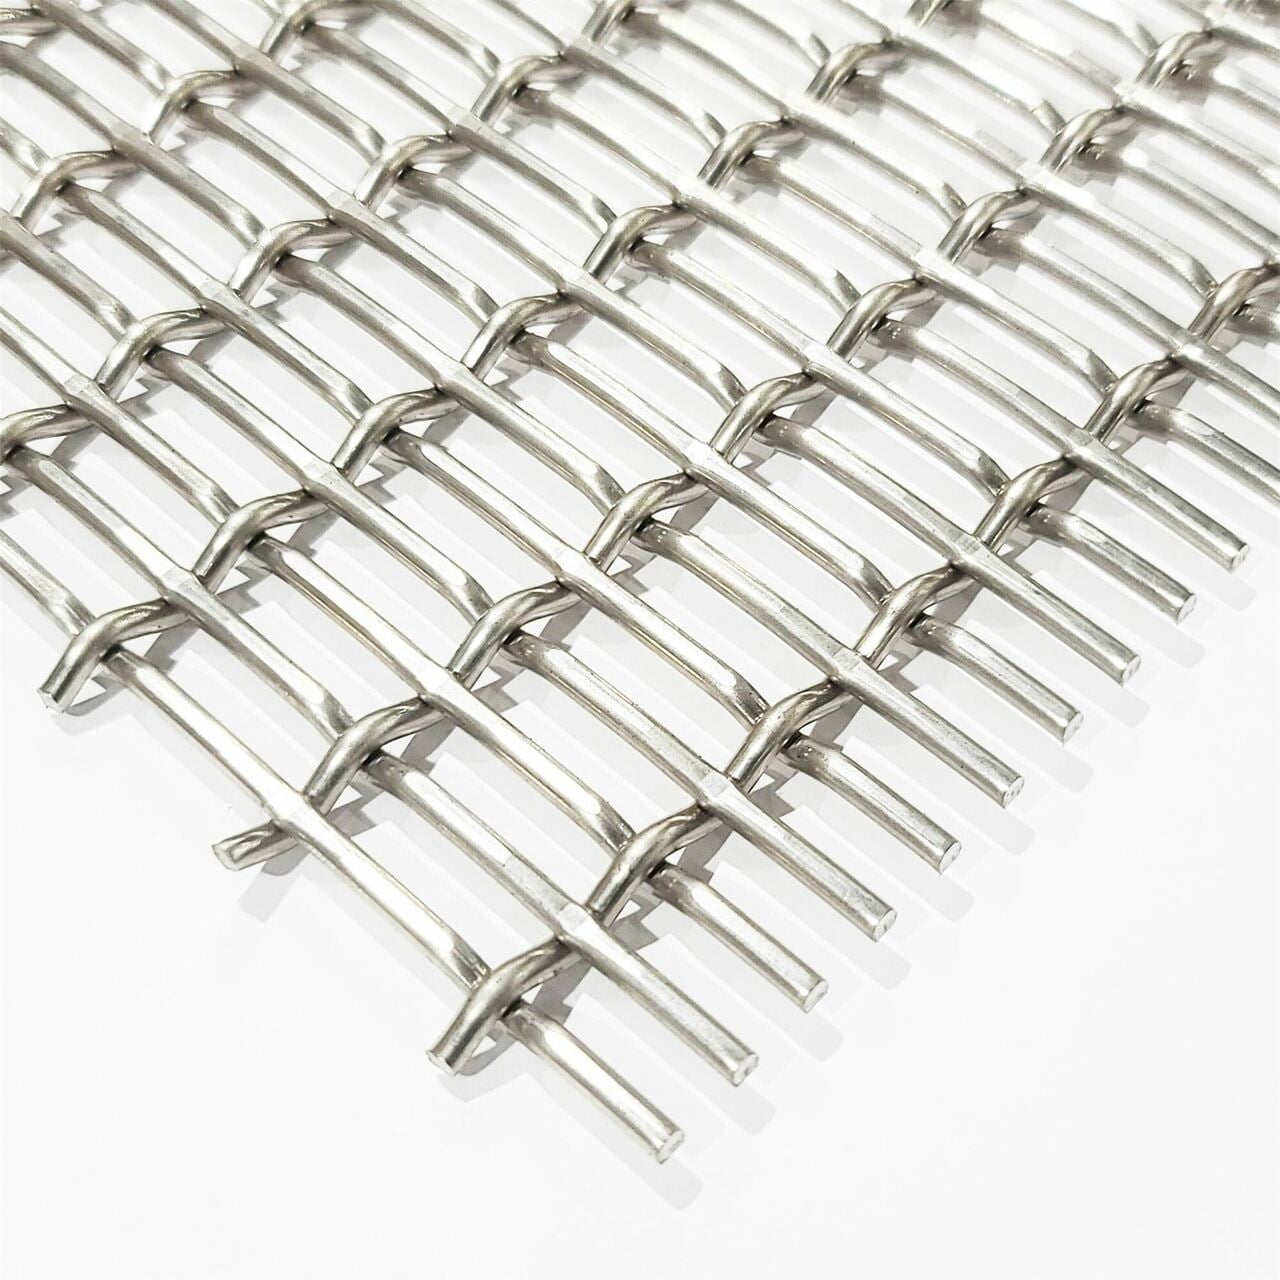 12"x12" Stainless Steel 304 Mesh #4 Filter Twill weave Wire Cloth Scre T 